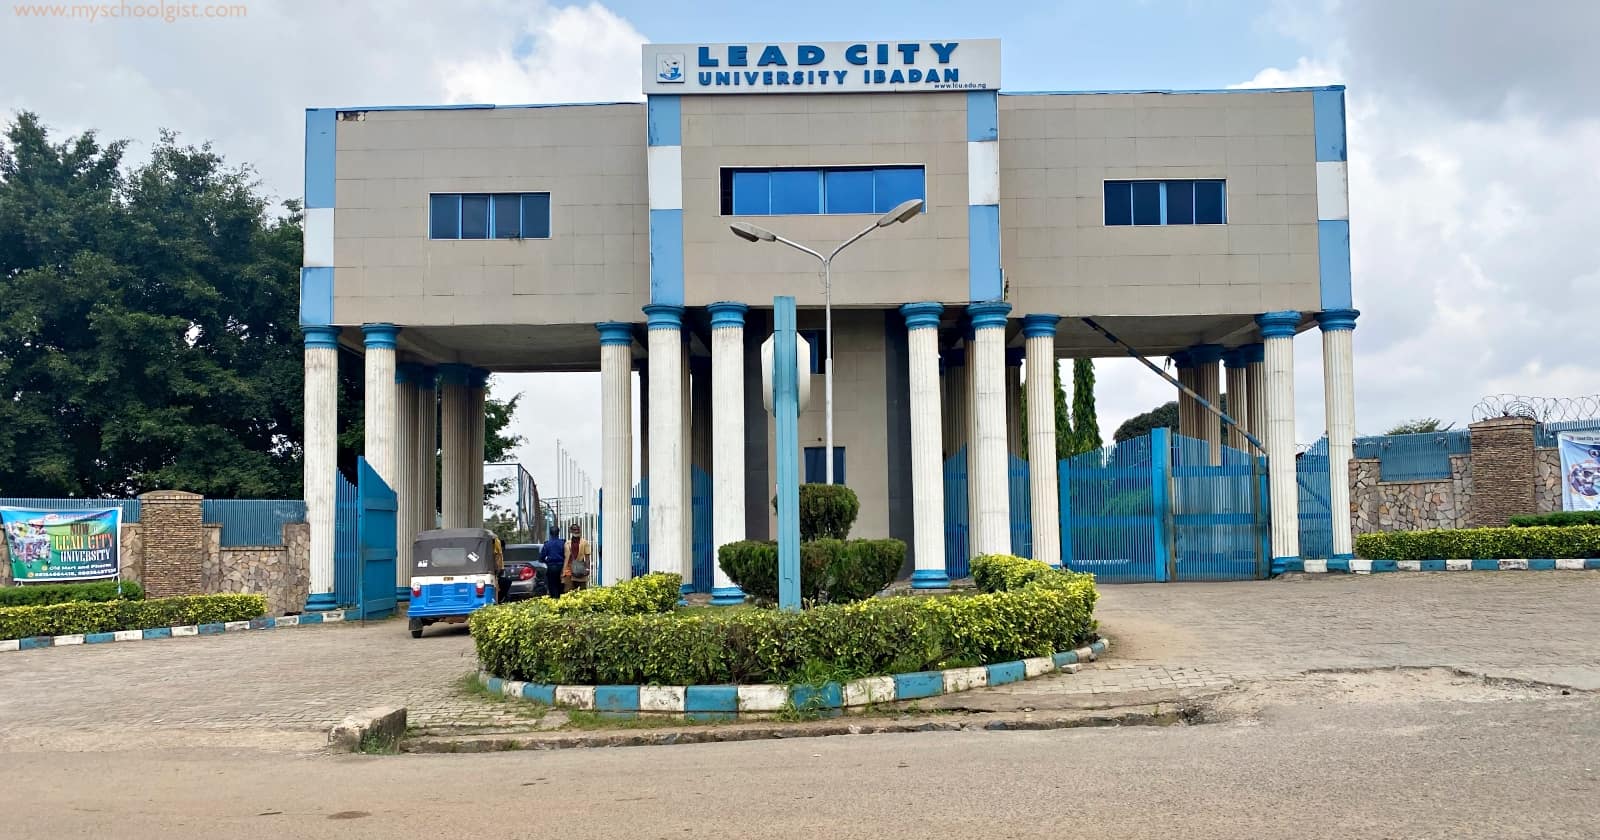 List of Courses Offered by Lead City University (LCU)